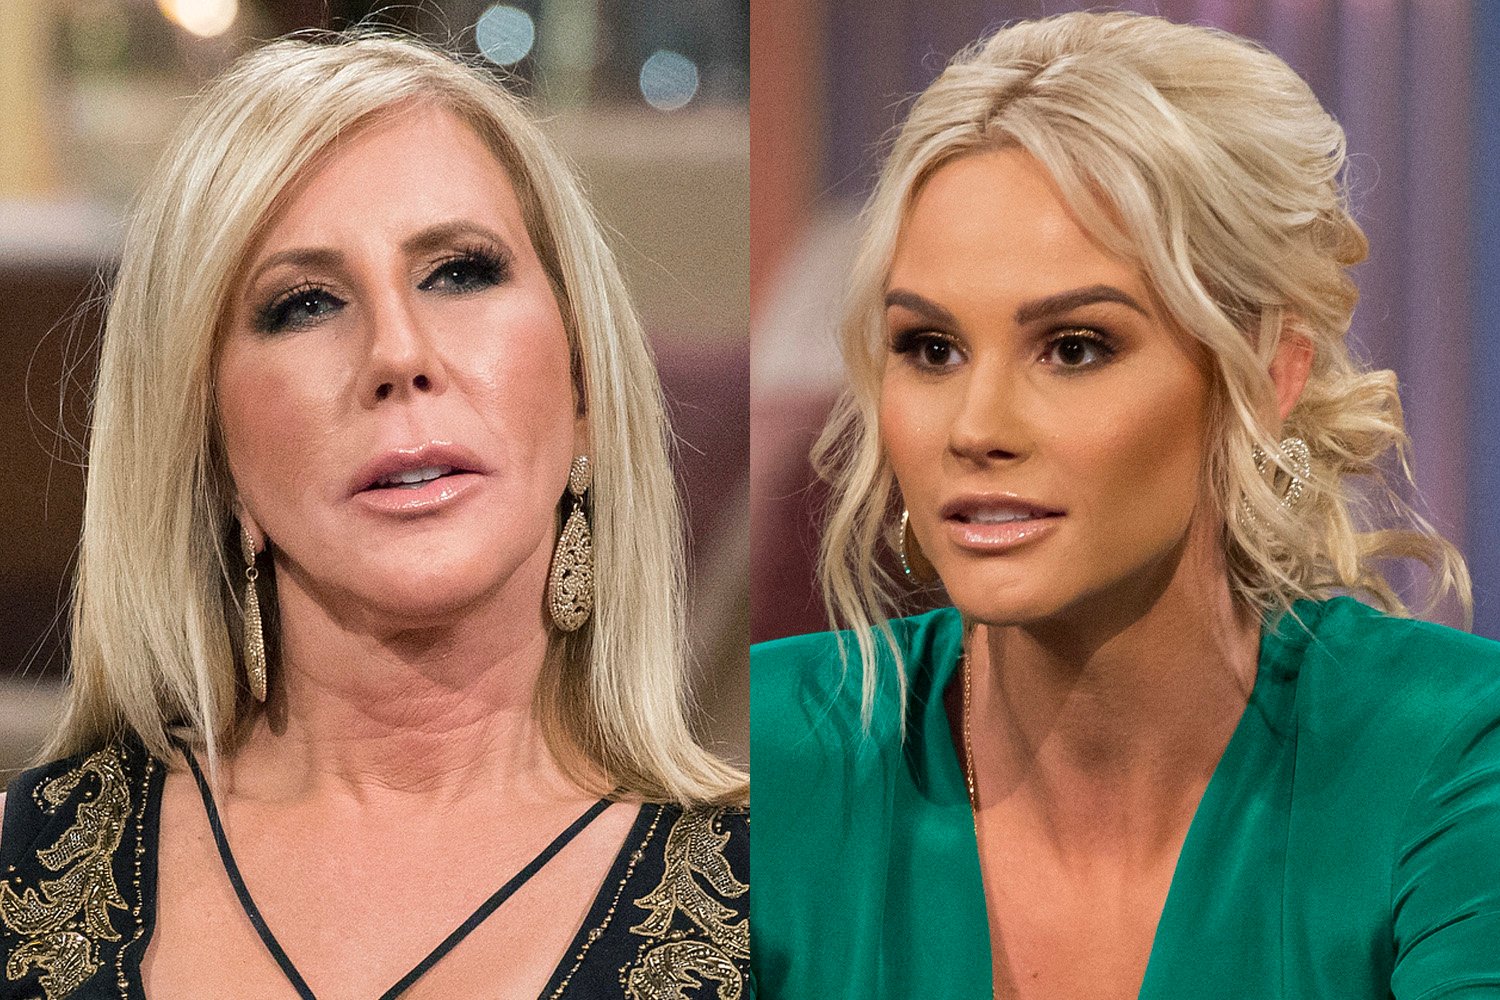 Vicki Gunvalson and Meghan King looking at each other